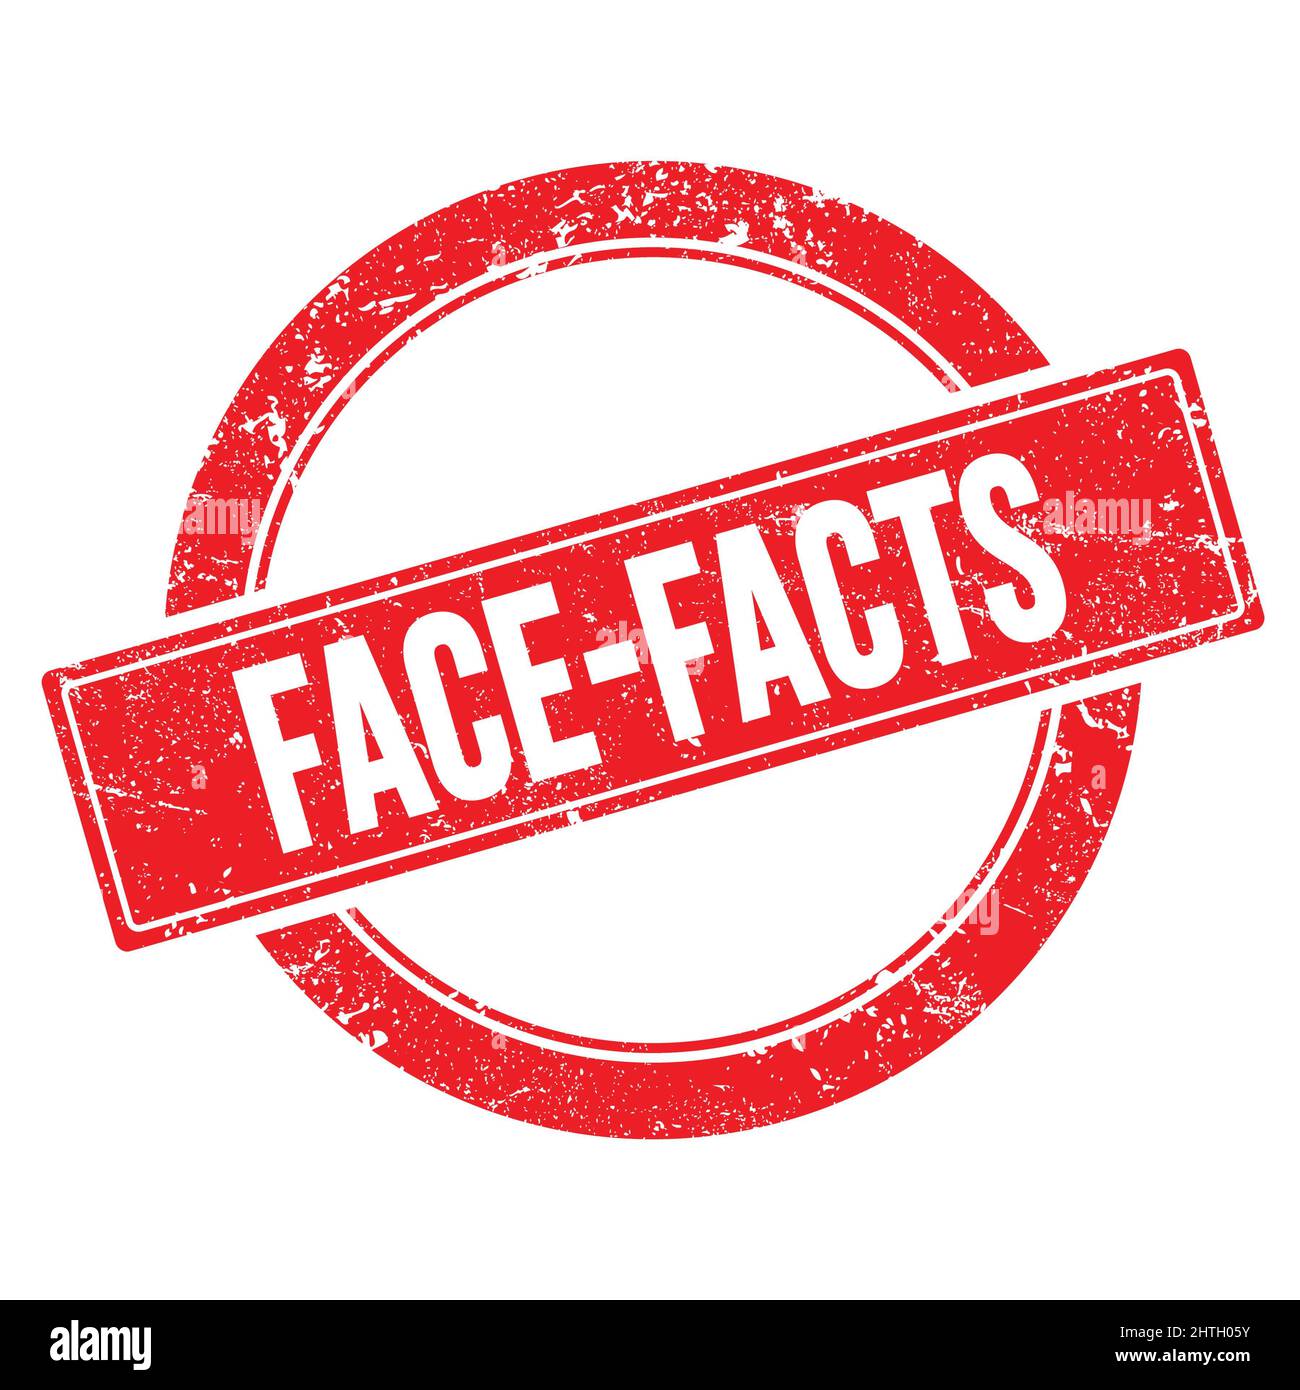 FACE-FACTS text on red grungy round vintage stamp. Stock Photo